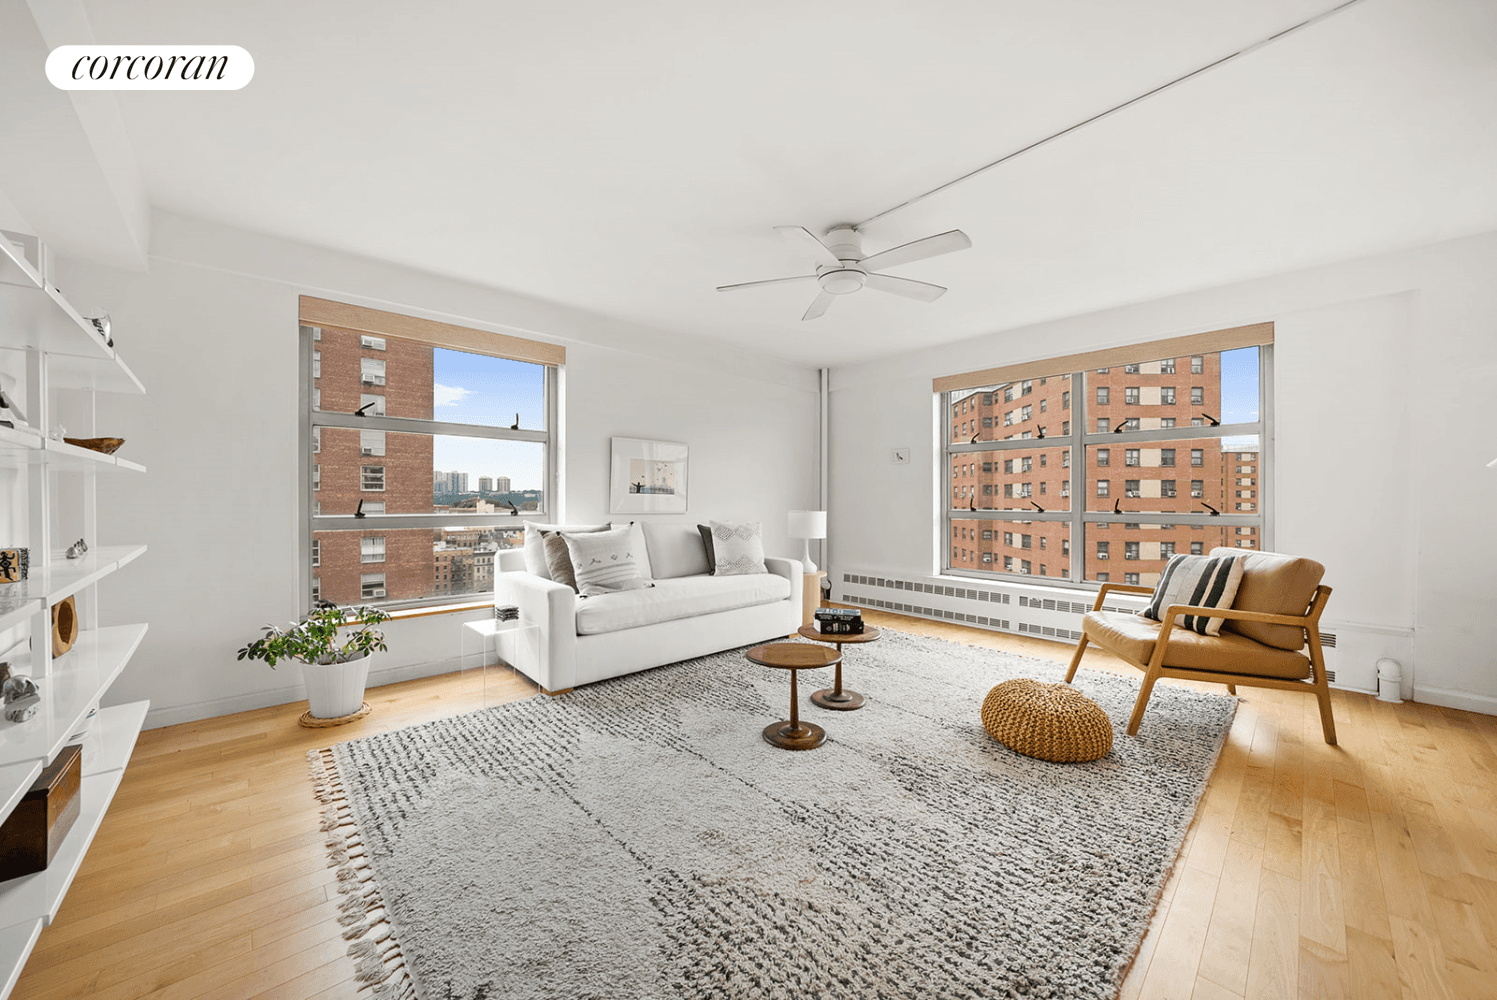 Discover the epitome of urban living in this exquisite one bedroom, one bath gem at the highly sought after Morningside Gardens, a tranquil oasis in Morningside Heights.